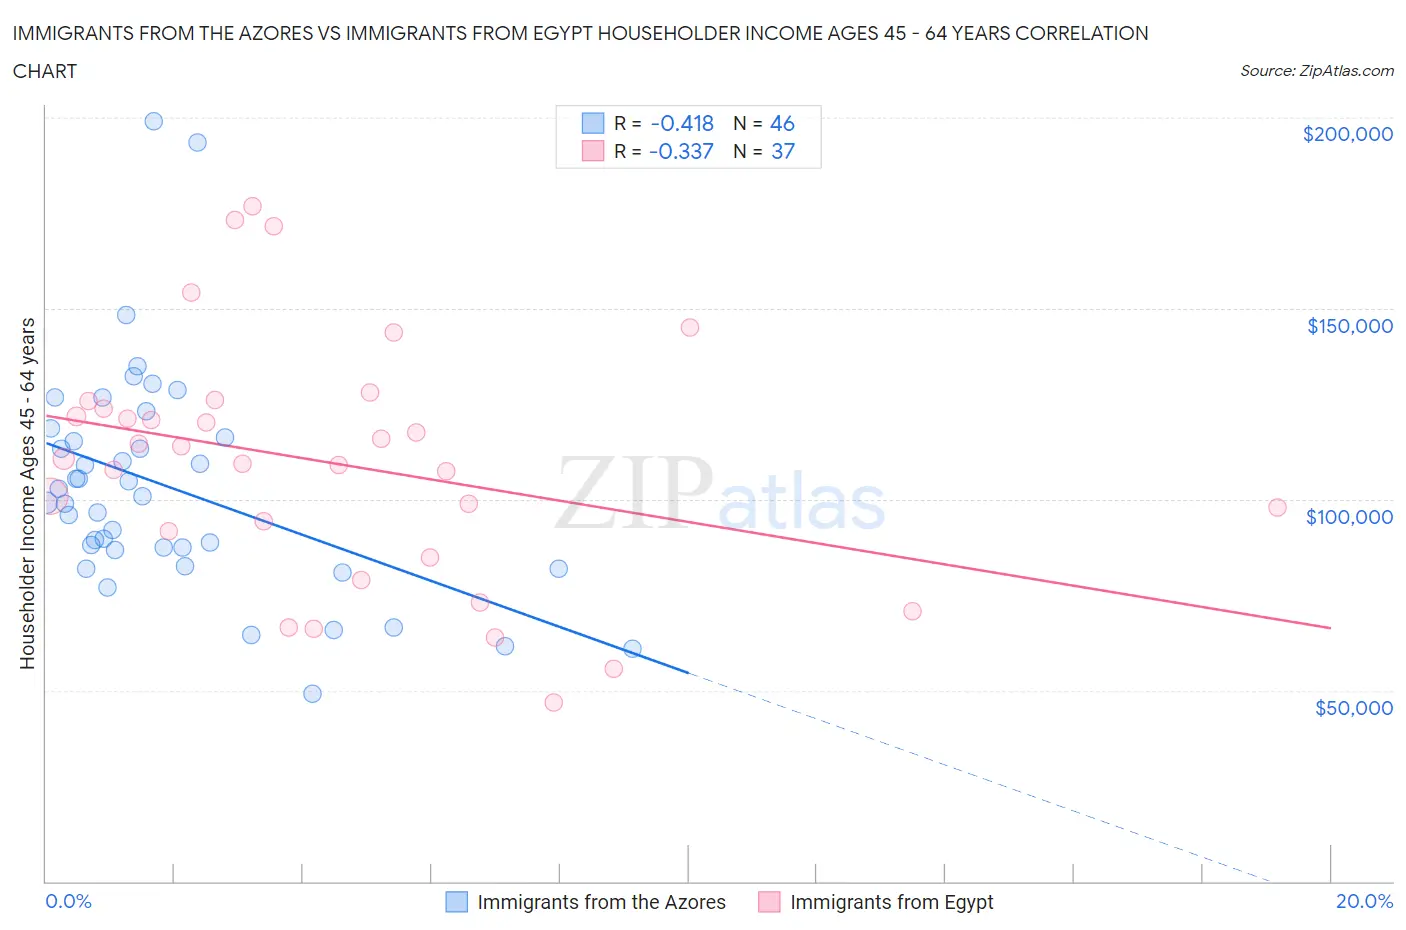 Immigrants from the Azores vs Immigrants from Egypt Householder Income Ages 45 - 64 years